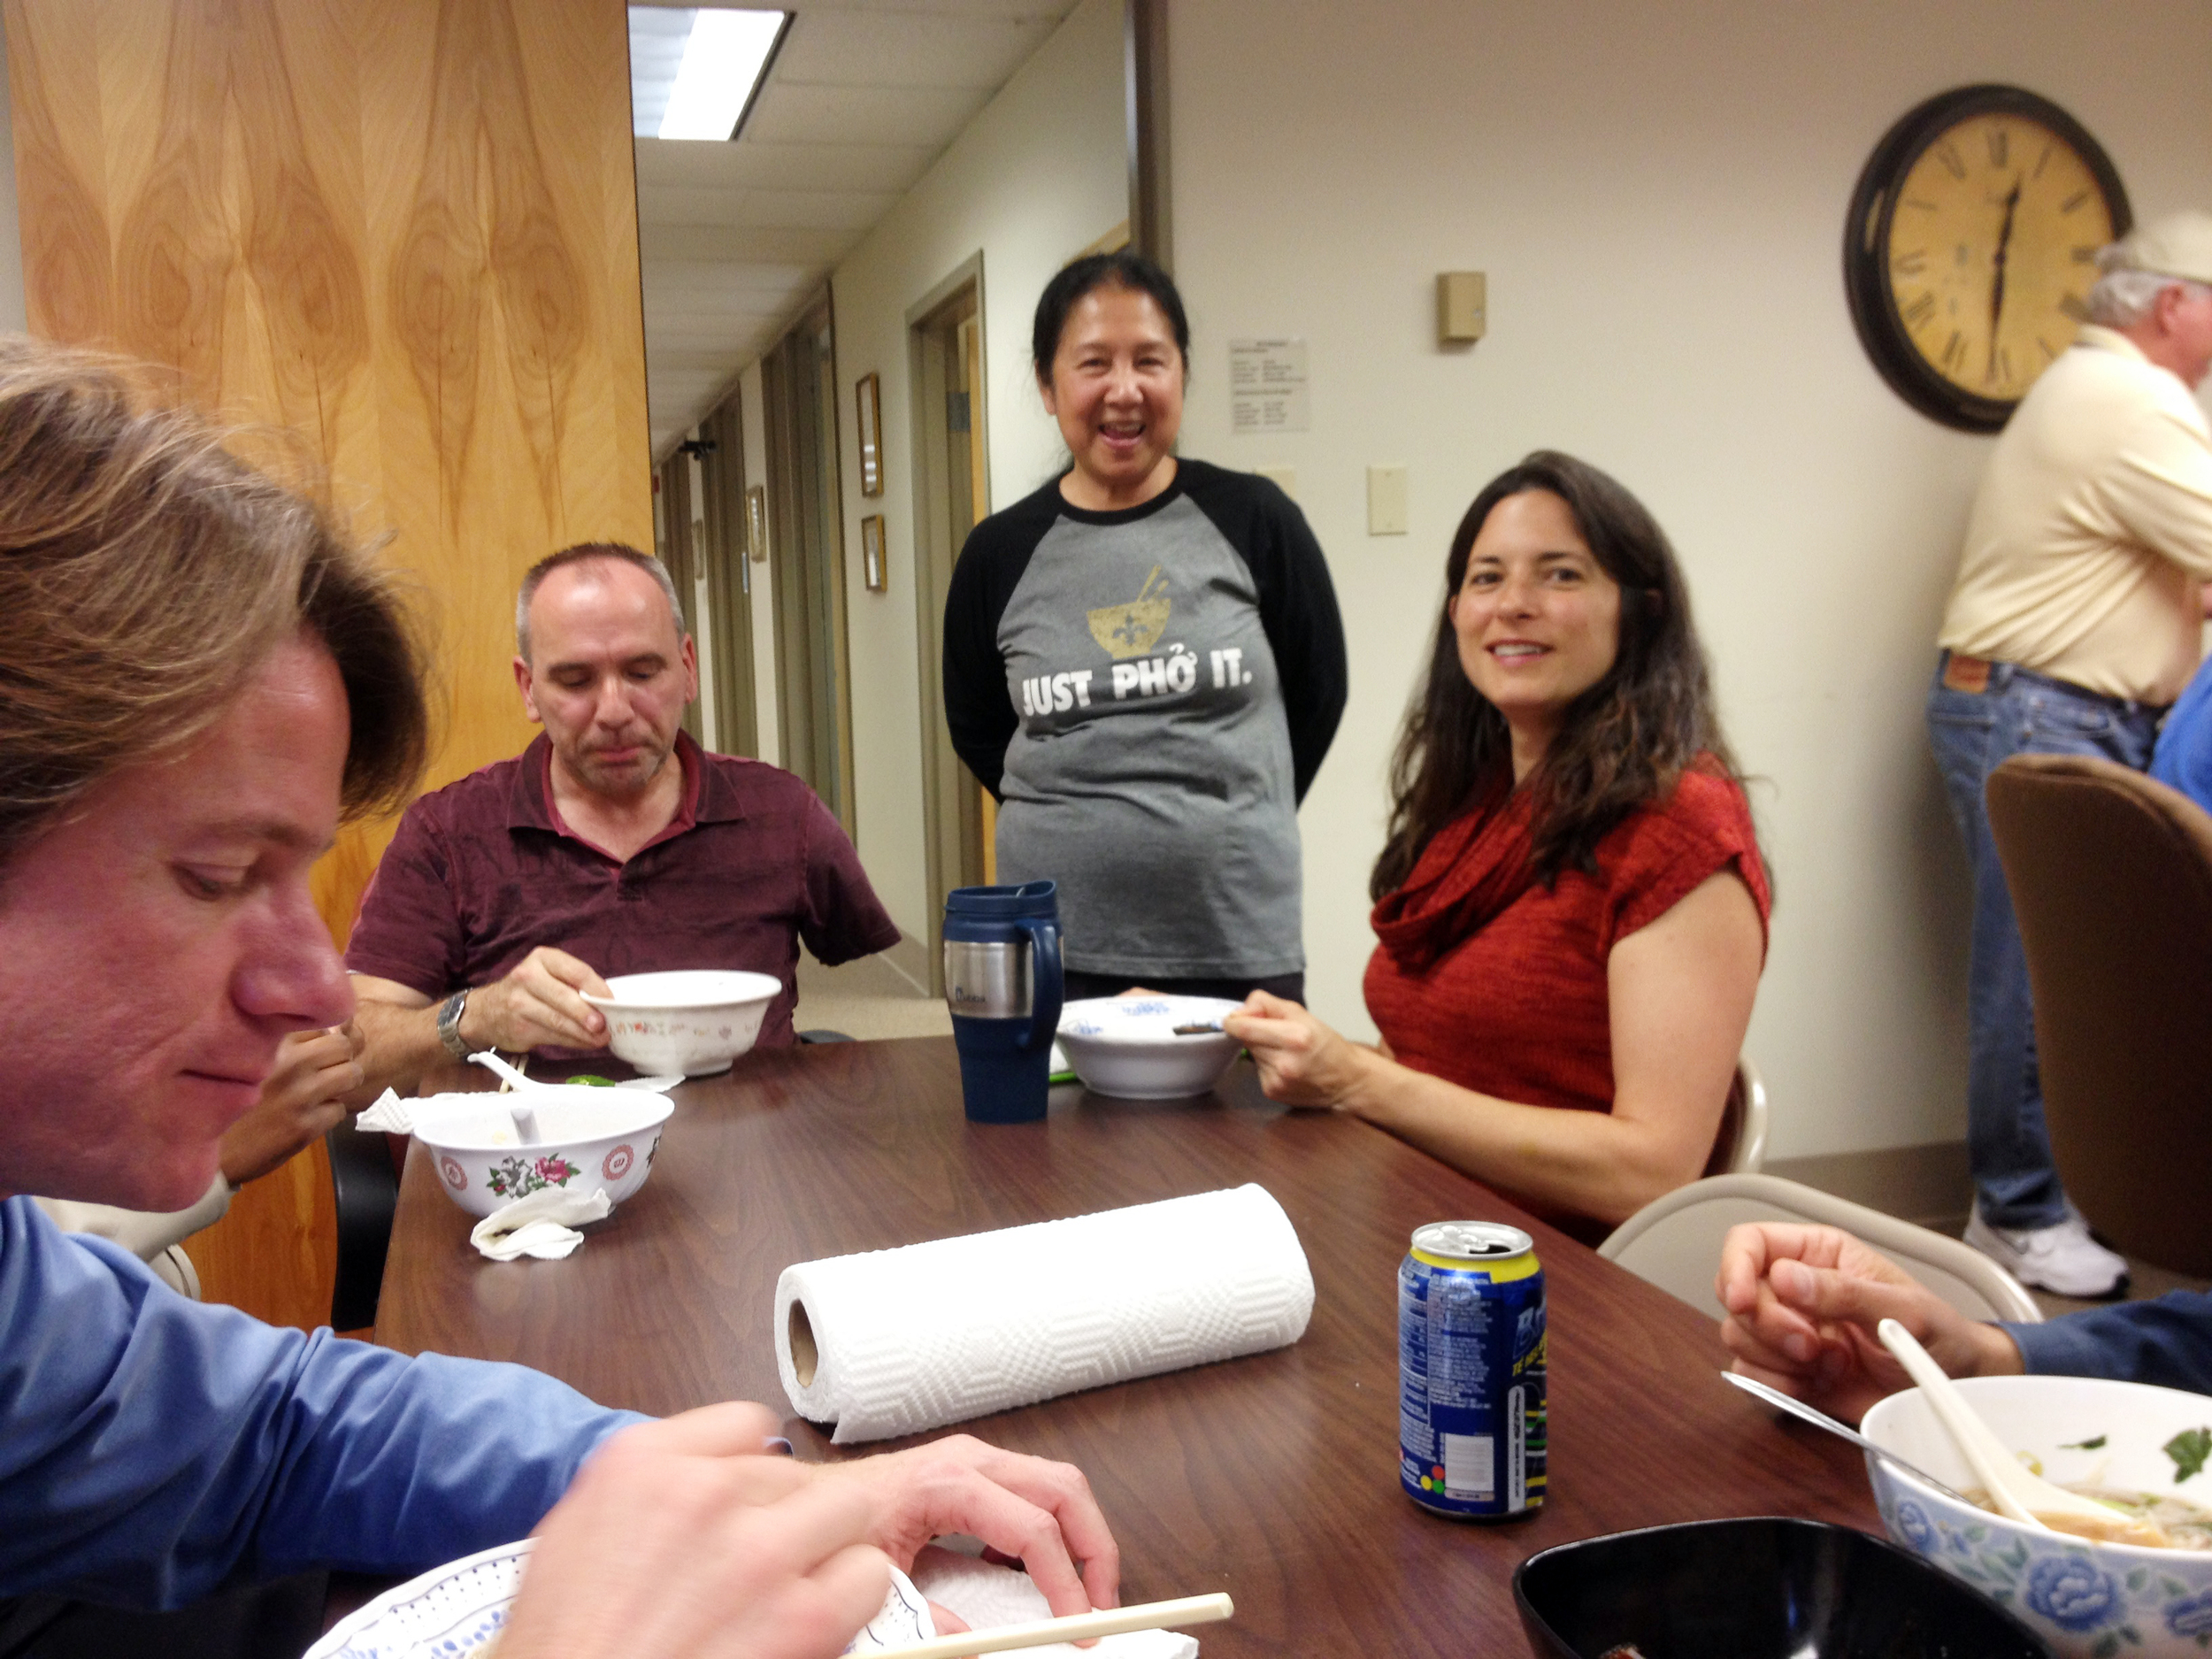  Infinity staff celebrate company and employee anniversaries with a pho lunch prepared by designer Phan Nguyen. From left, Bill Thomassie, Mike Laux, Phan Nguyen and Rachel Kenney. 